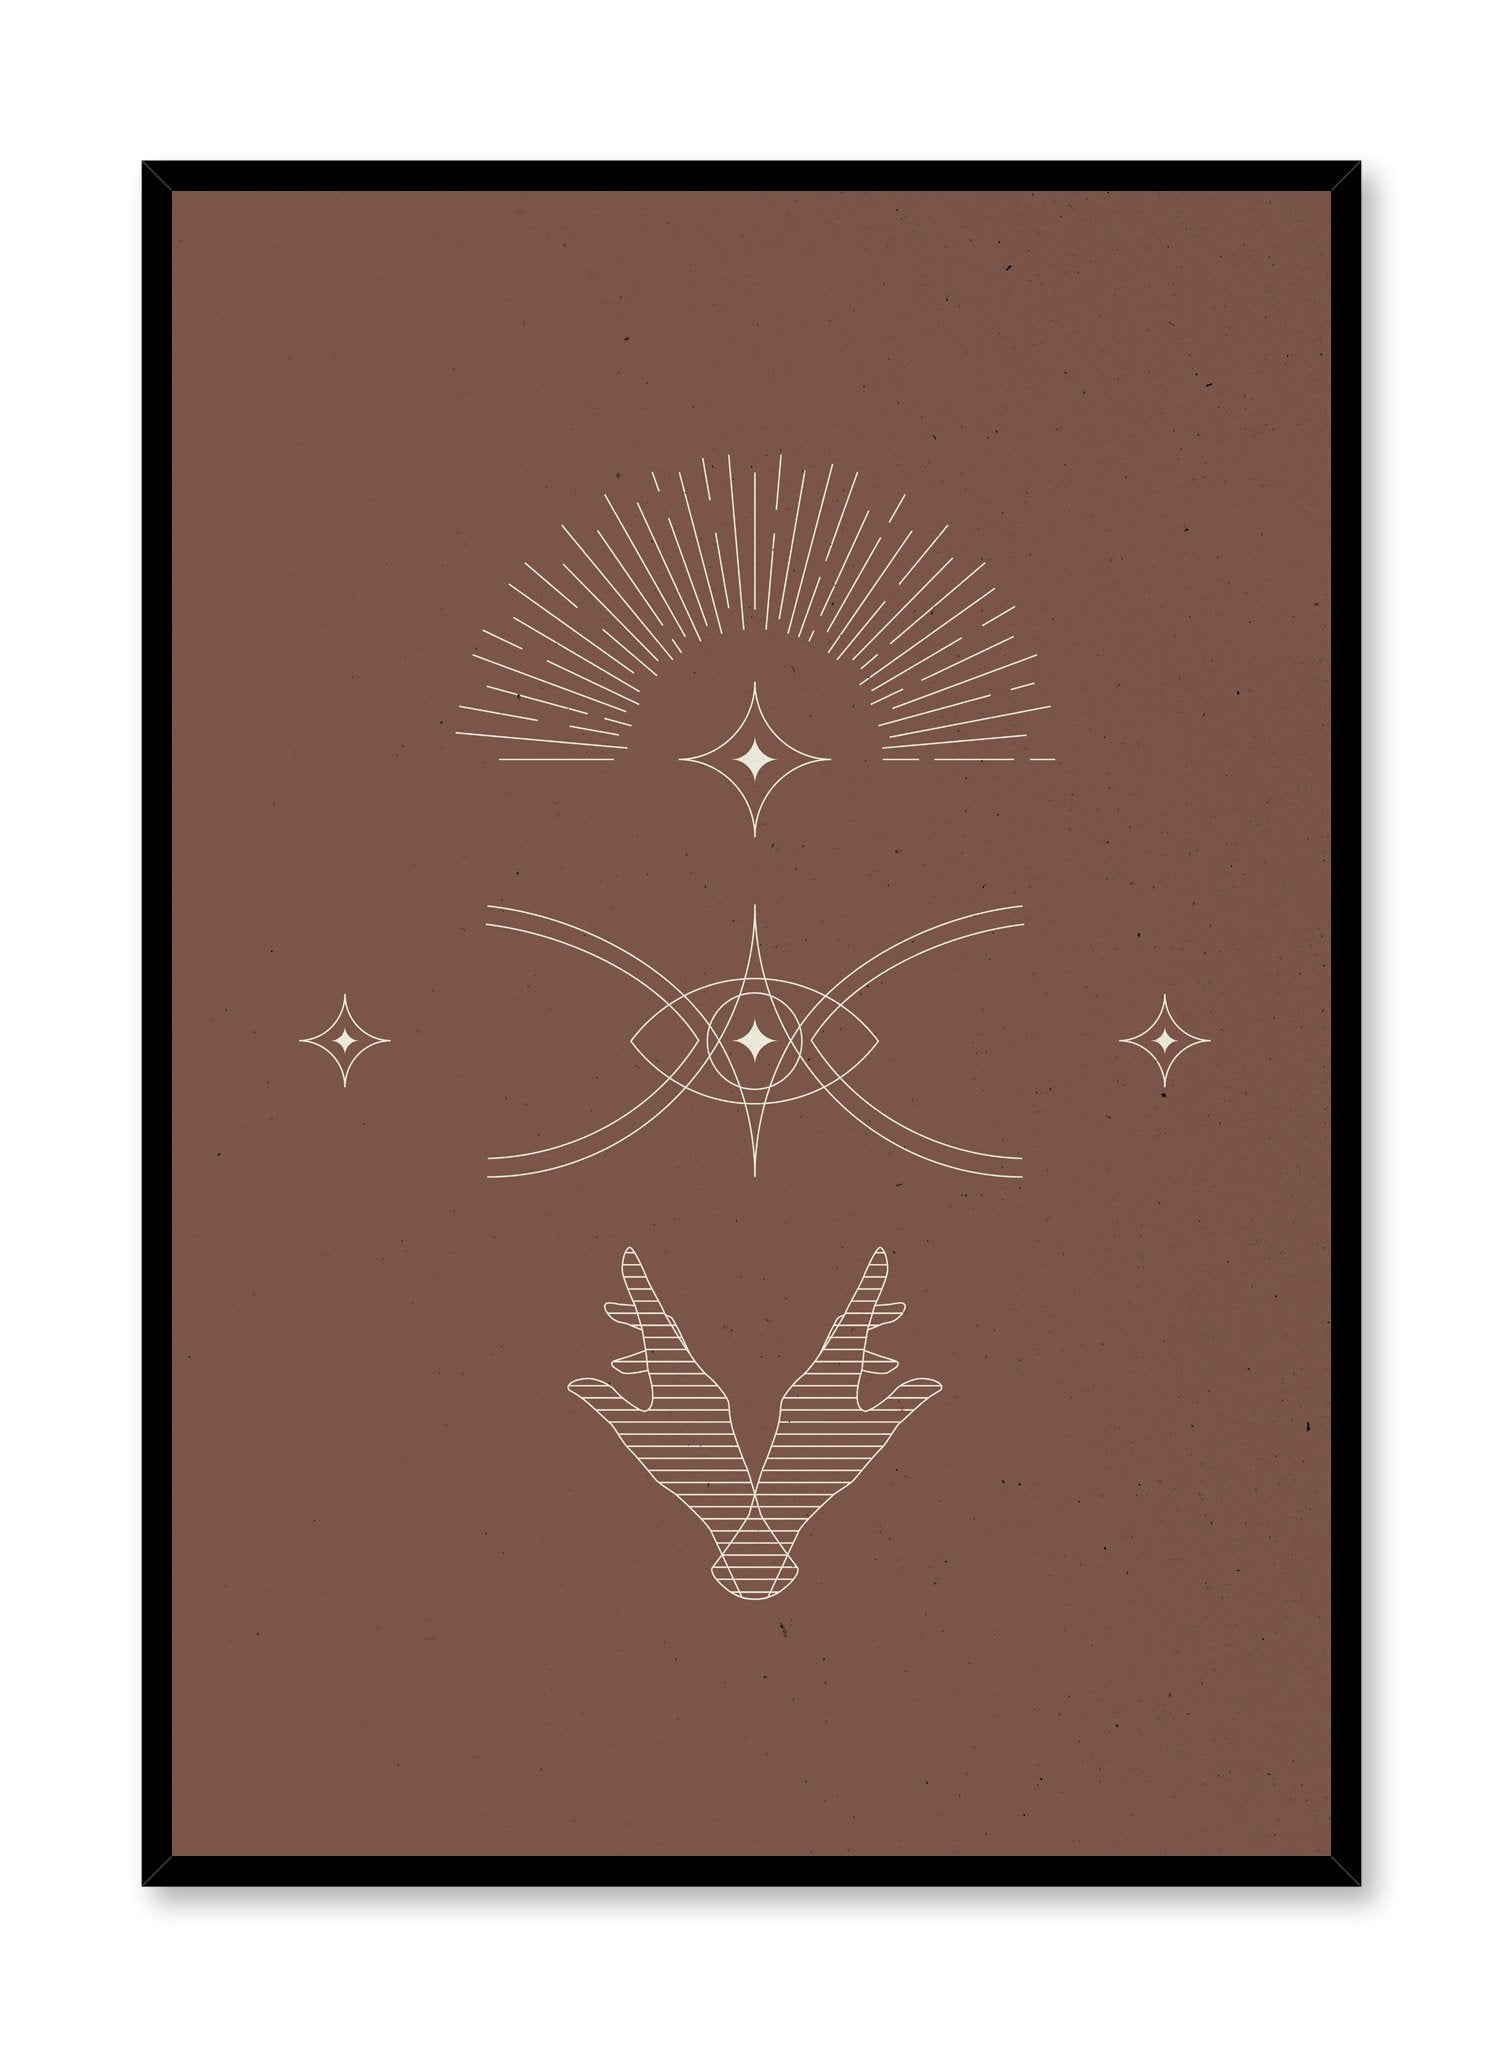 Celestial illustration poster by Opposite Wall with abstract drawing of The Cosmos